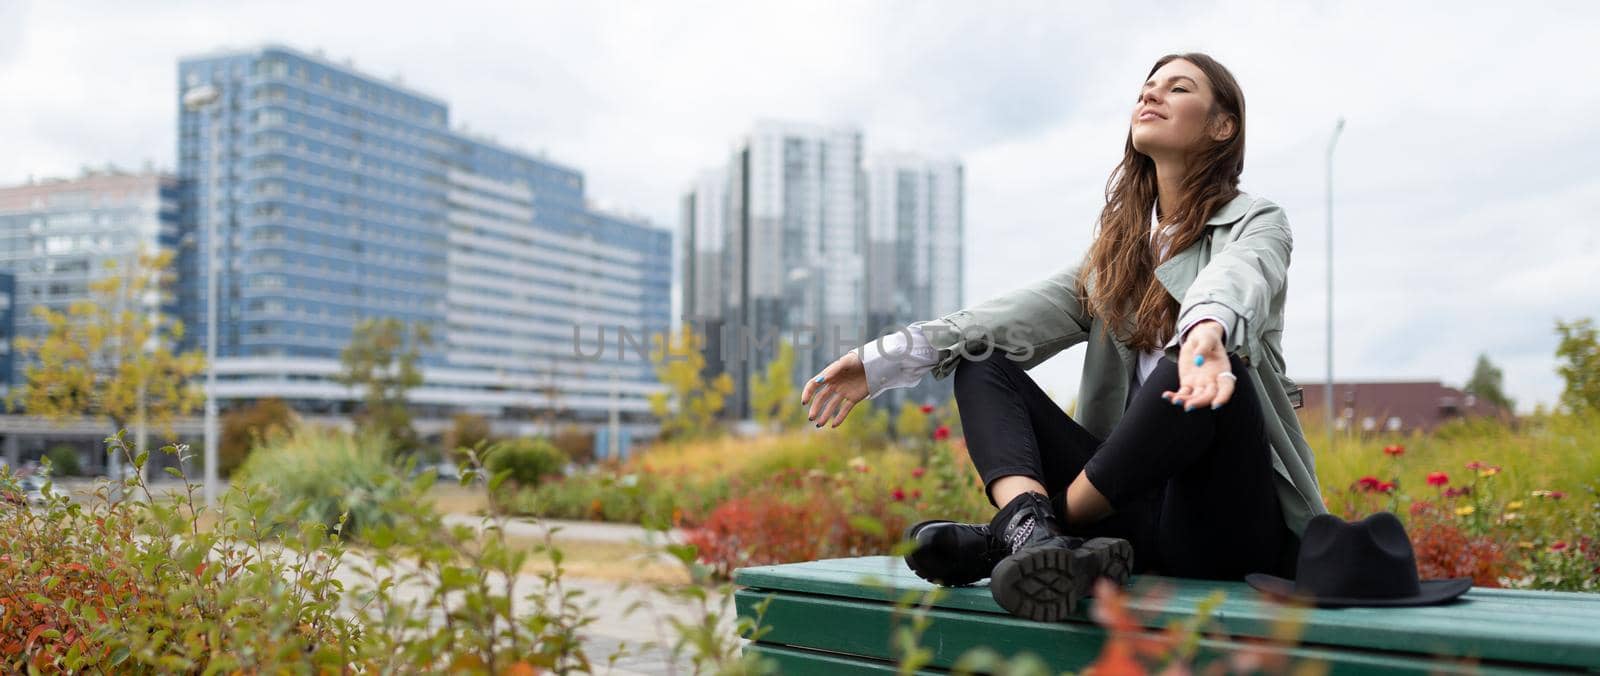 a young woman during a lunch break relax sitting in a yoga position in the park on the background of office buildings.